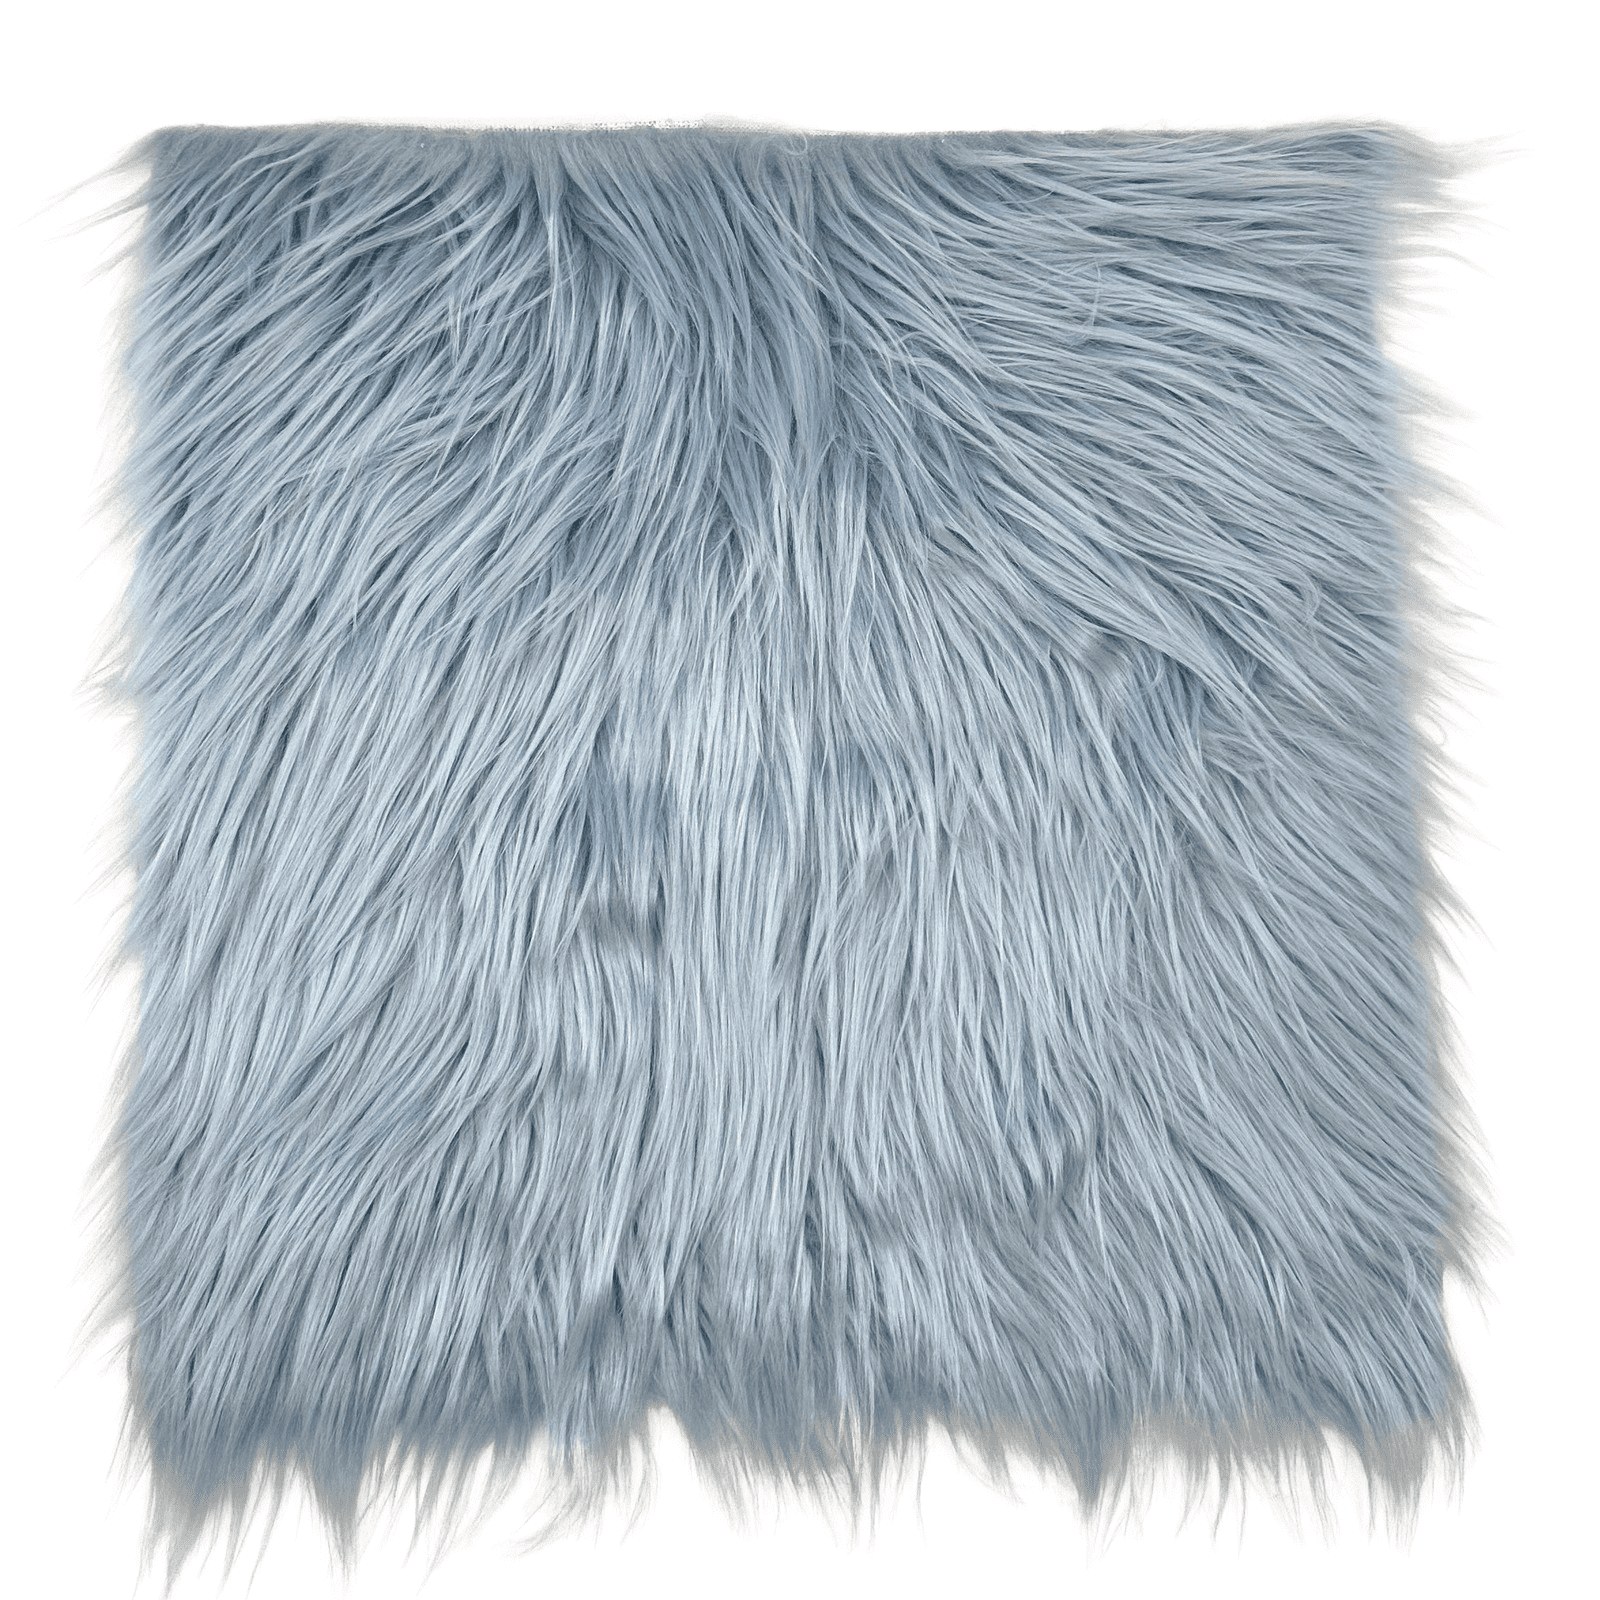 Ice Fabrics Faux Fur Fabric Squares - 10x10 Inches Pre-Cut Craft Fur Fabric  - Shaggy Mohair Fabric for Costumes, Apparel, Rugs, Pillows, Decorations  and More - Baby Blue Fur Fabric 